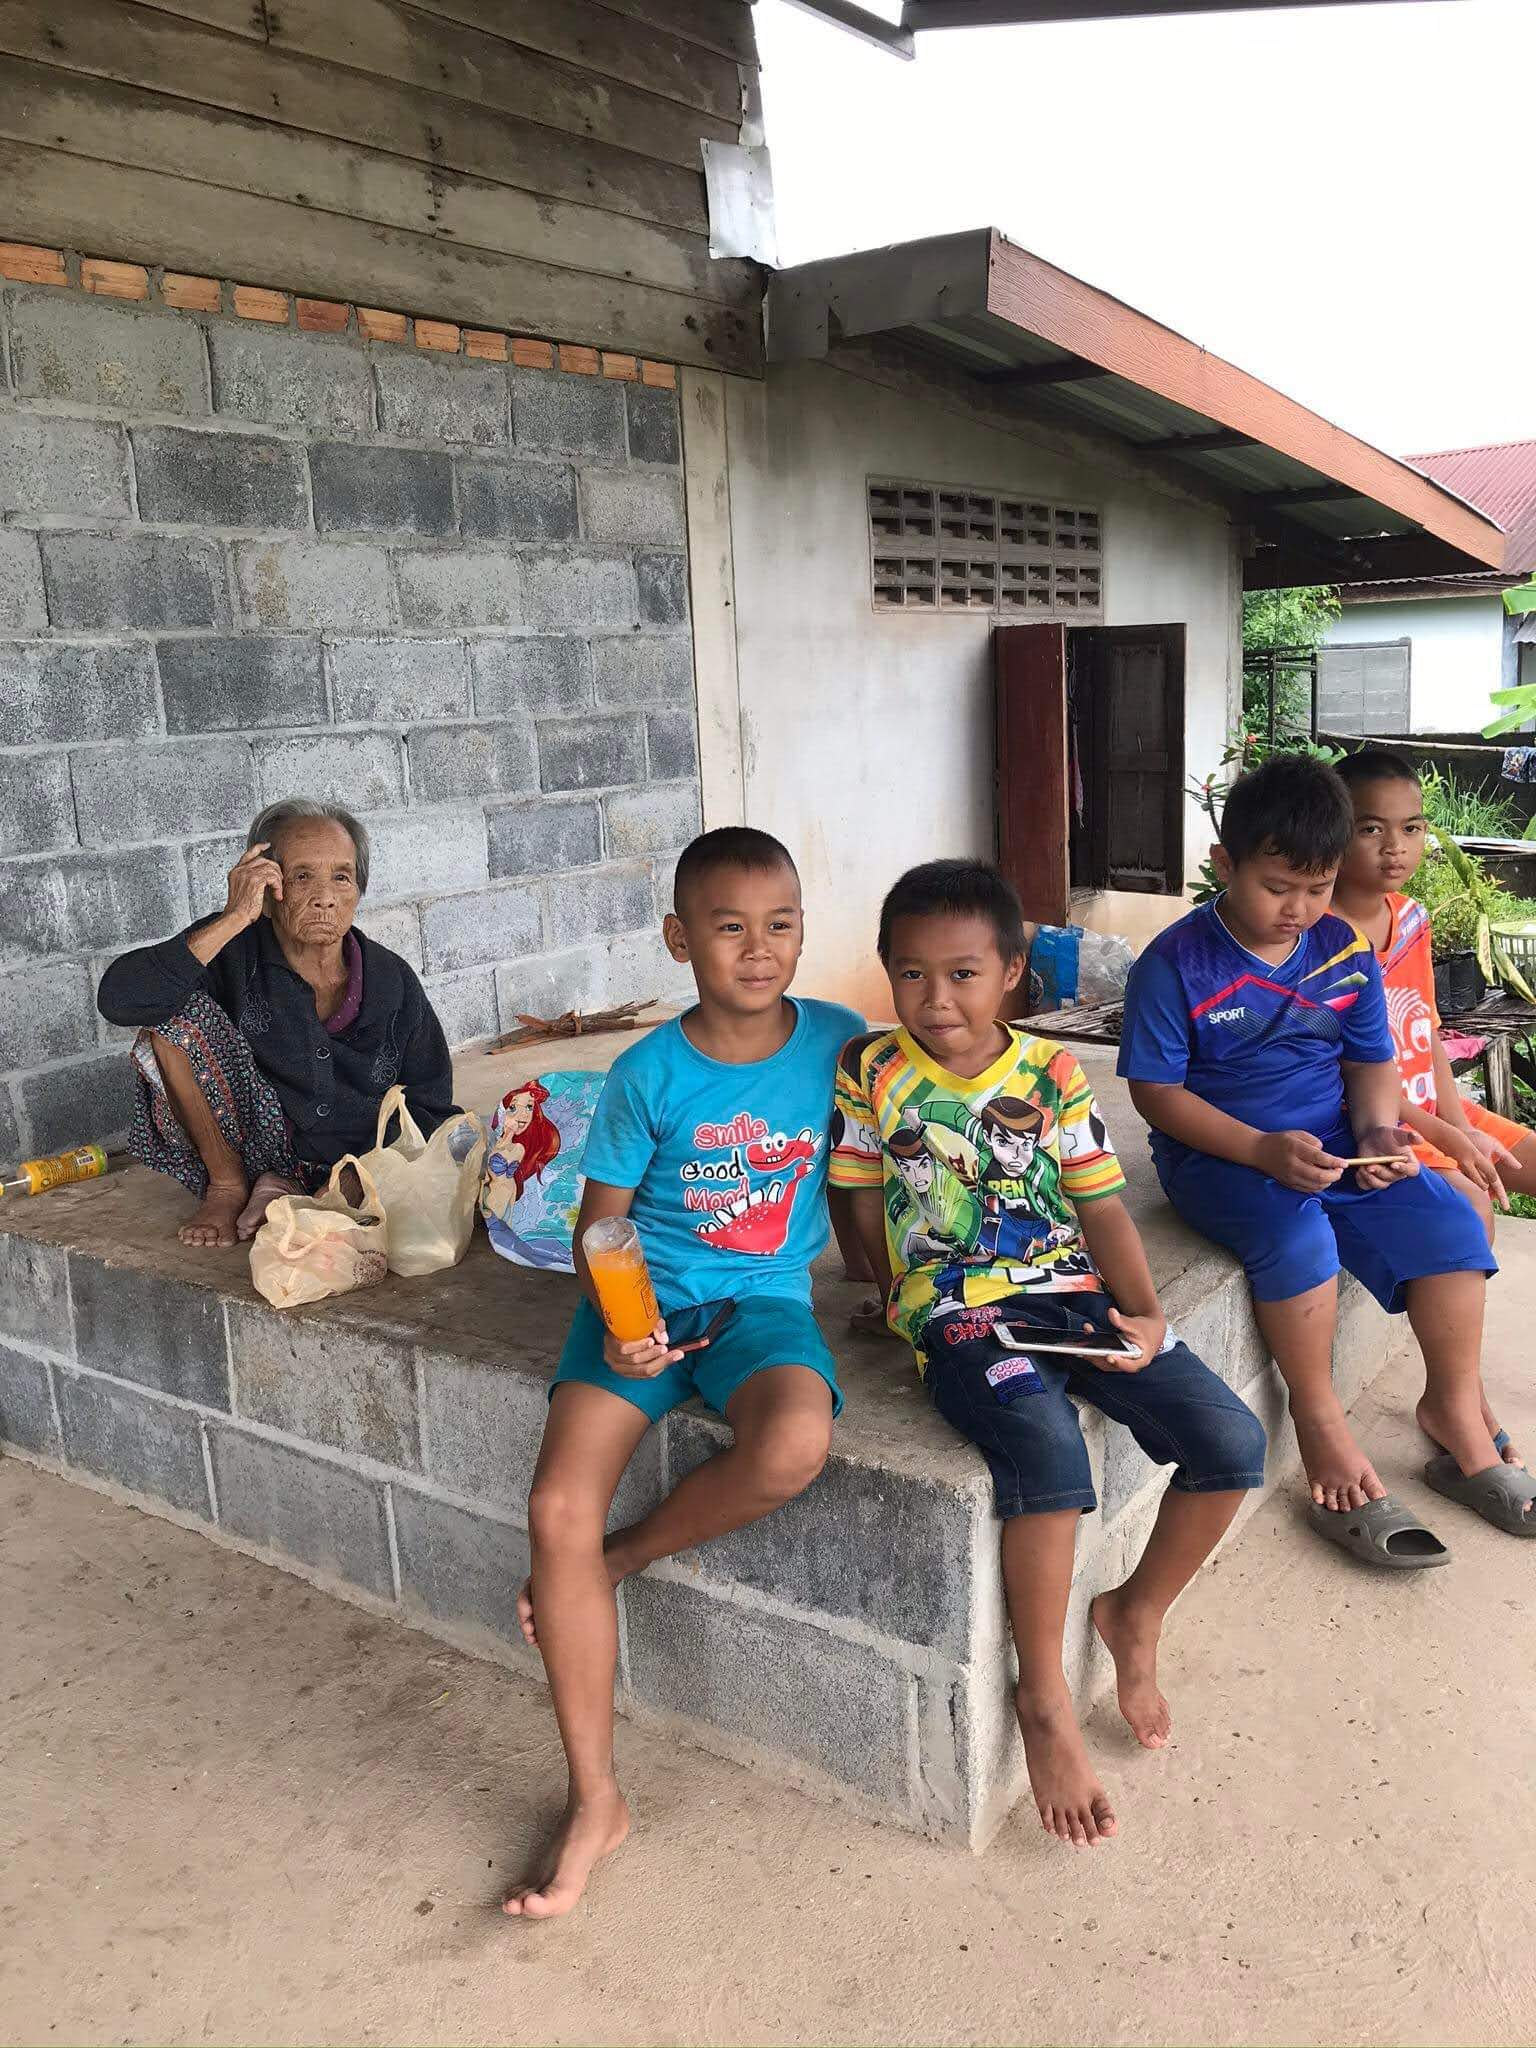 a Thai elder woman sits on her front porch behind a young boy and his friends